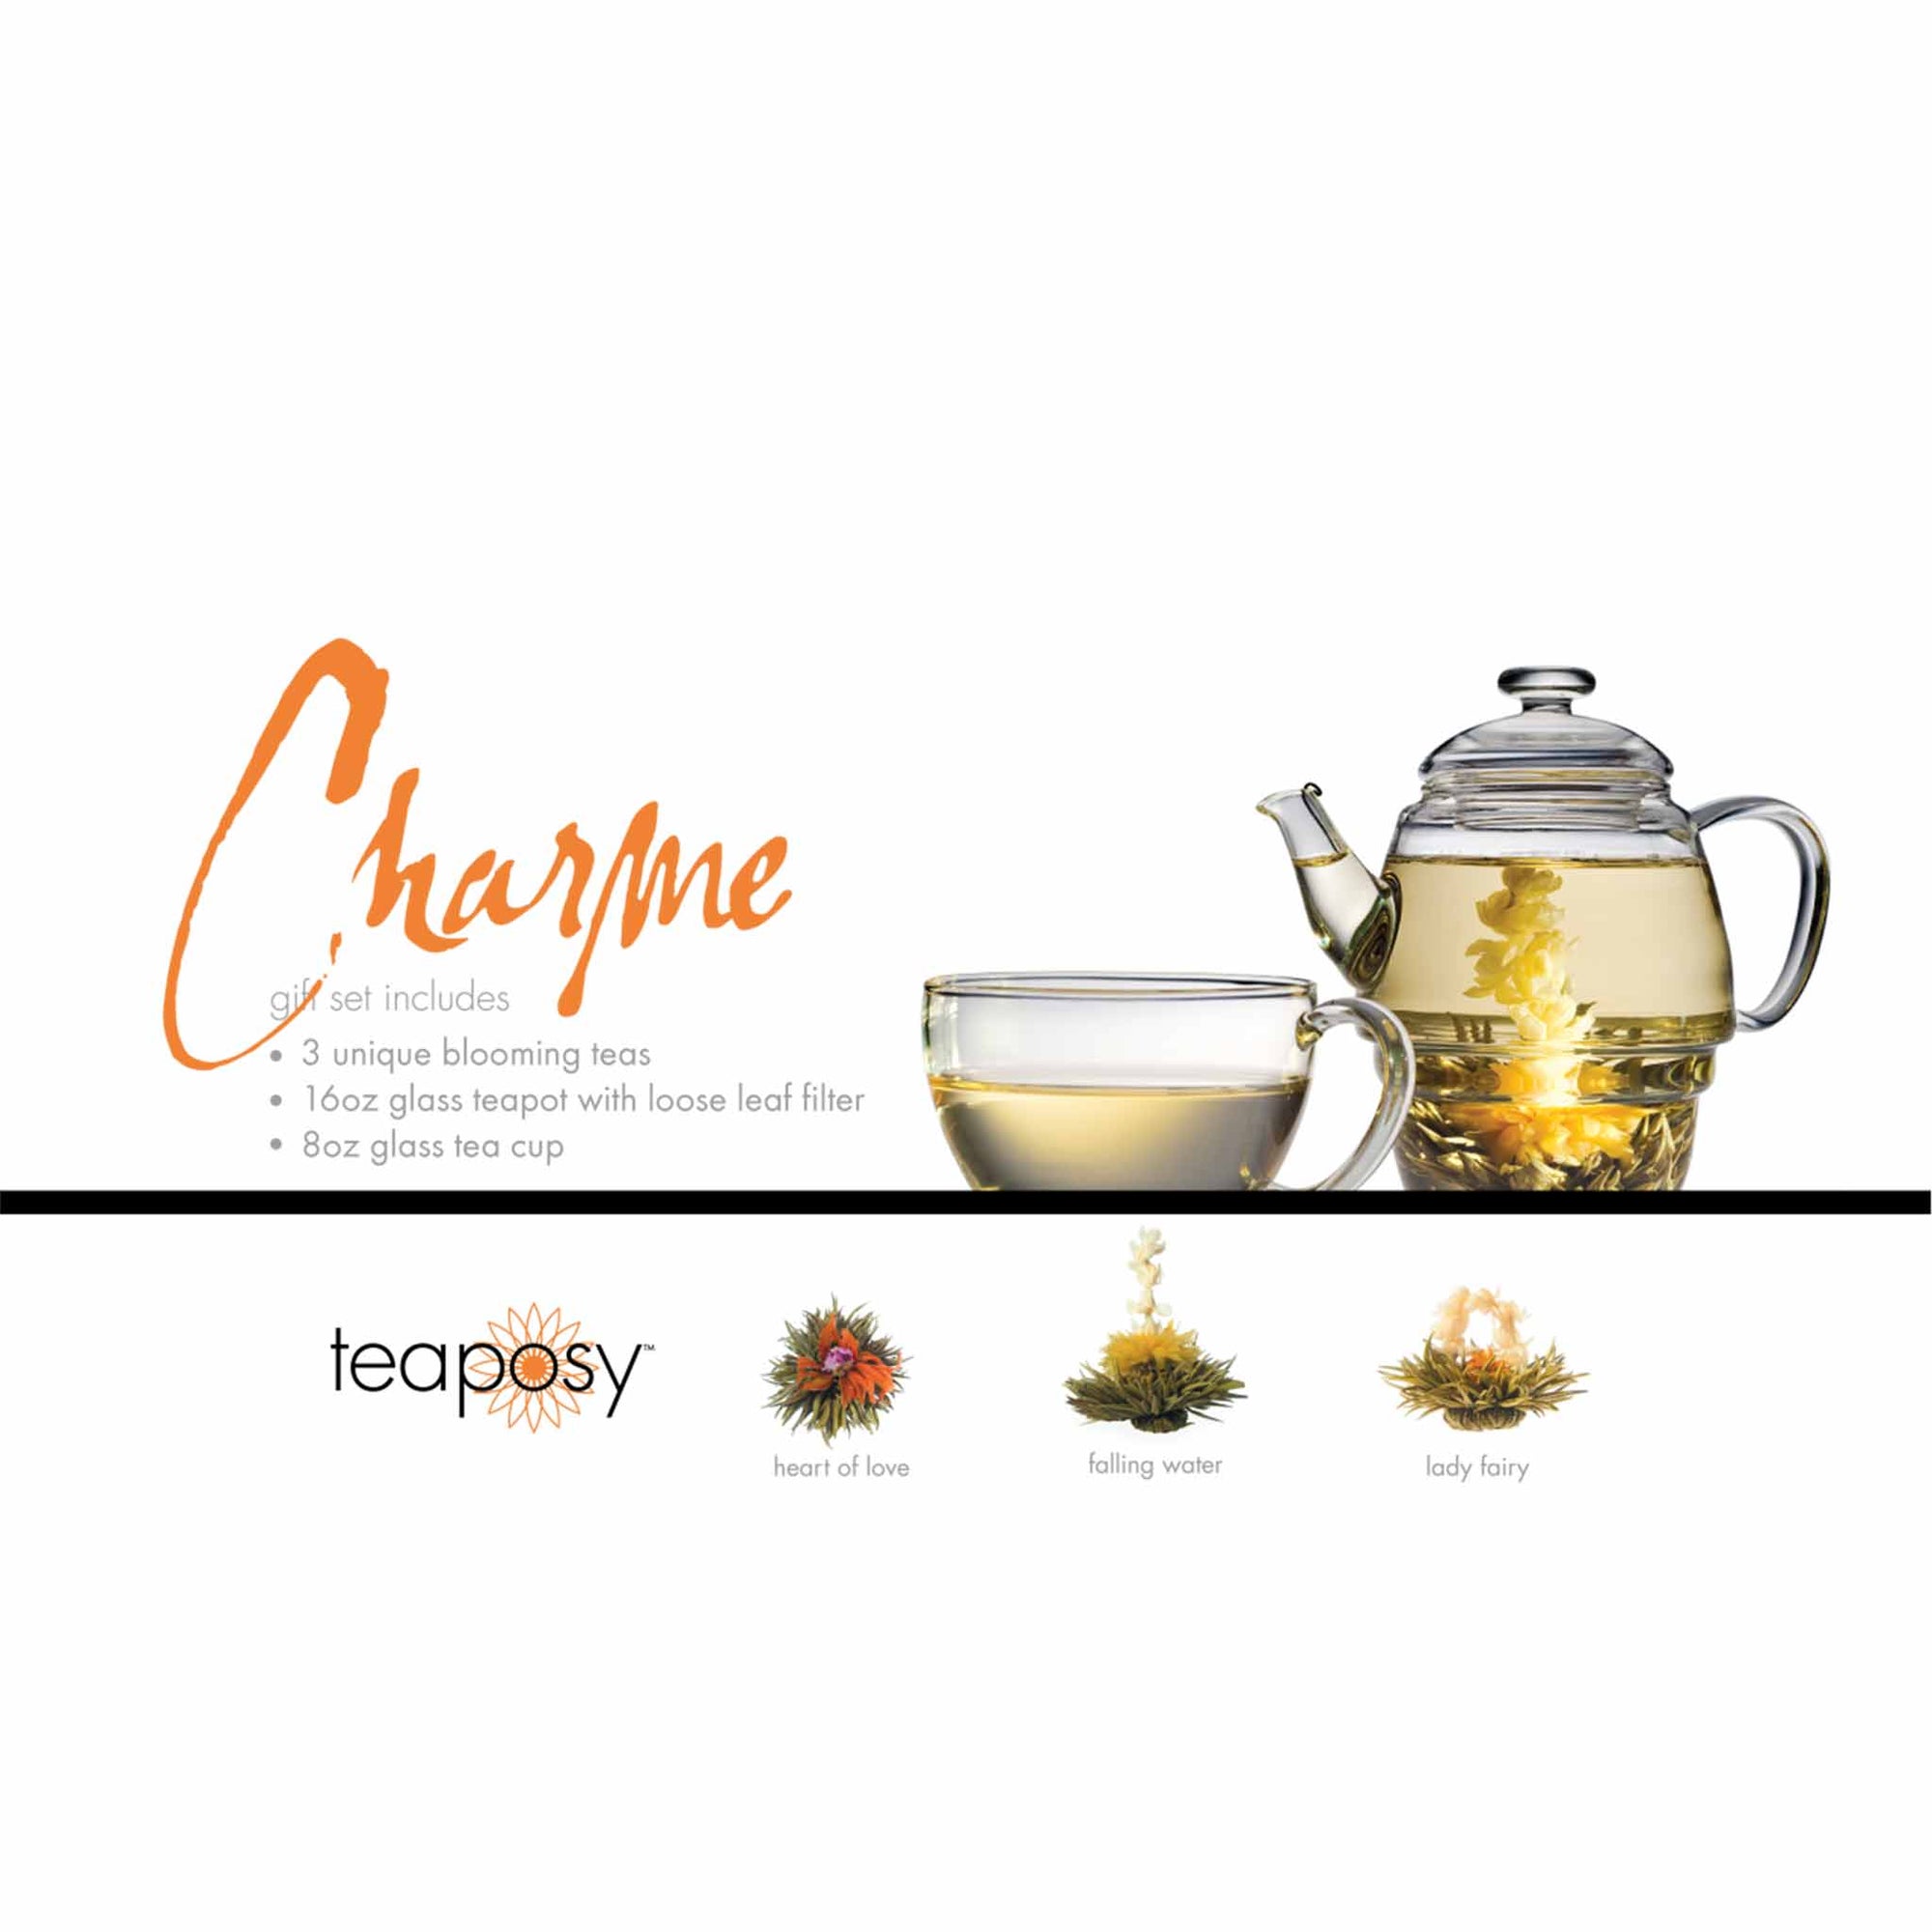 Teaposy charme posy gift set with 3 unique blooming teas, a 16oz glass teapot and an 8oz glass tea cup